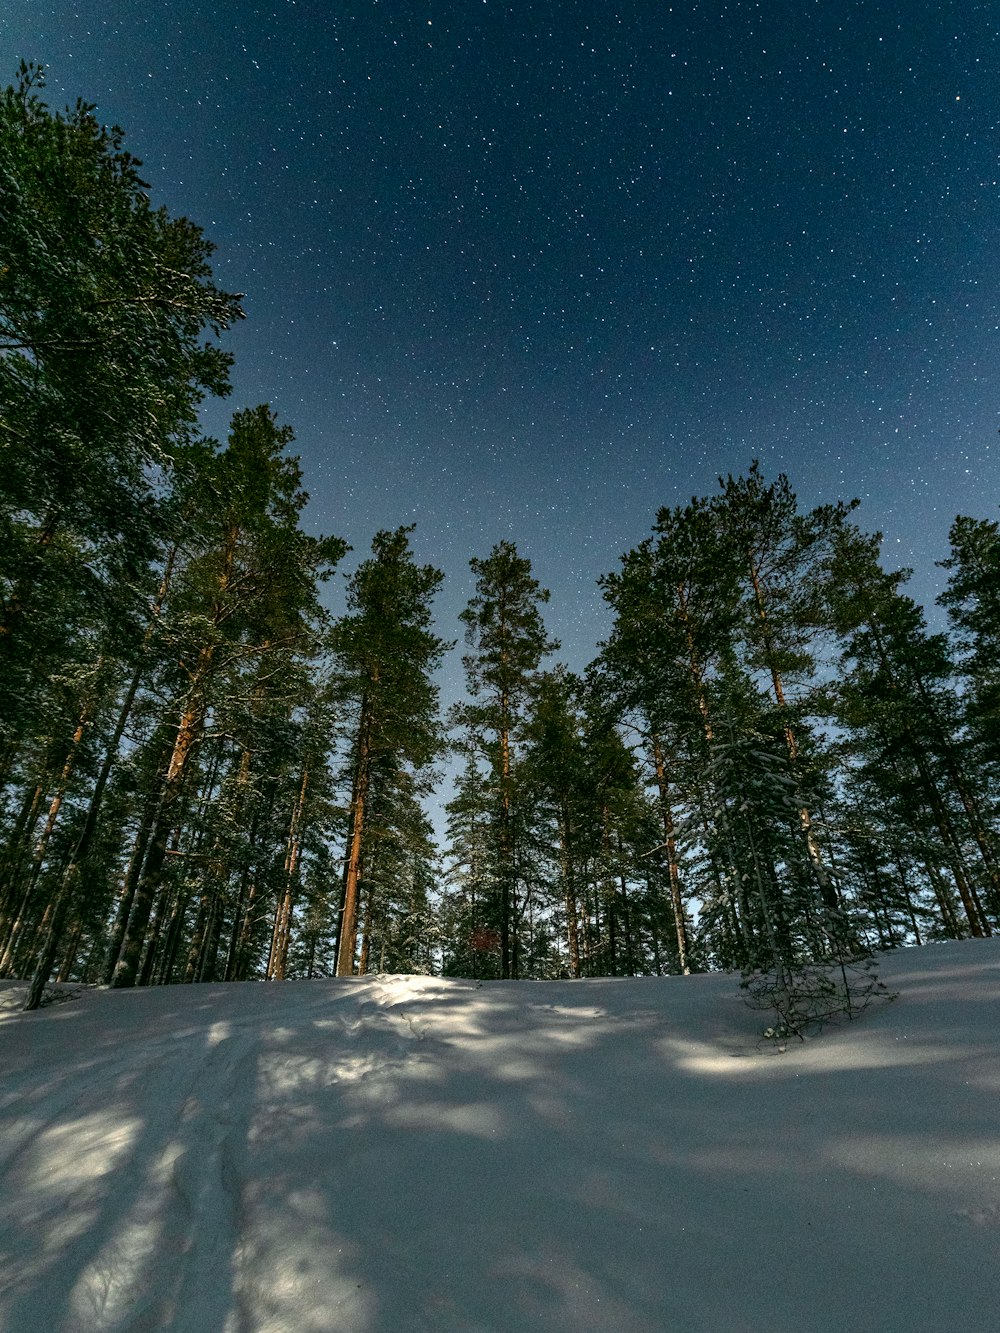 a snow covered forest under a night sky filled with stars